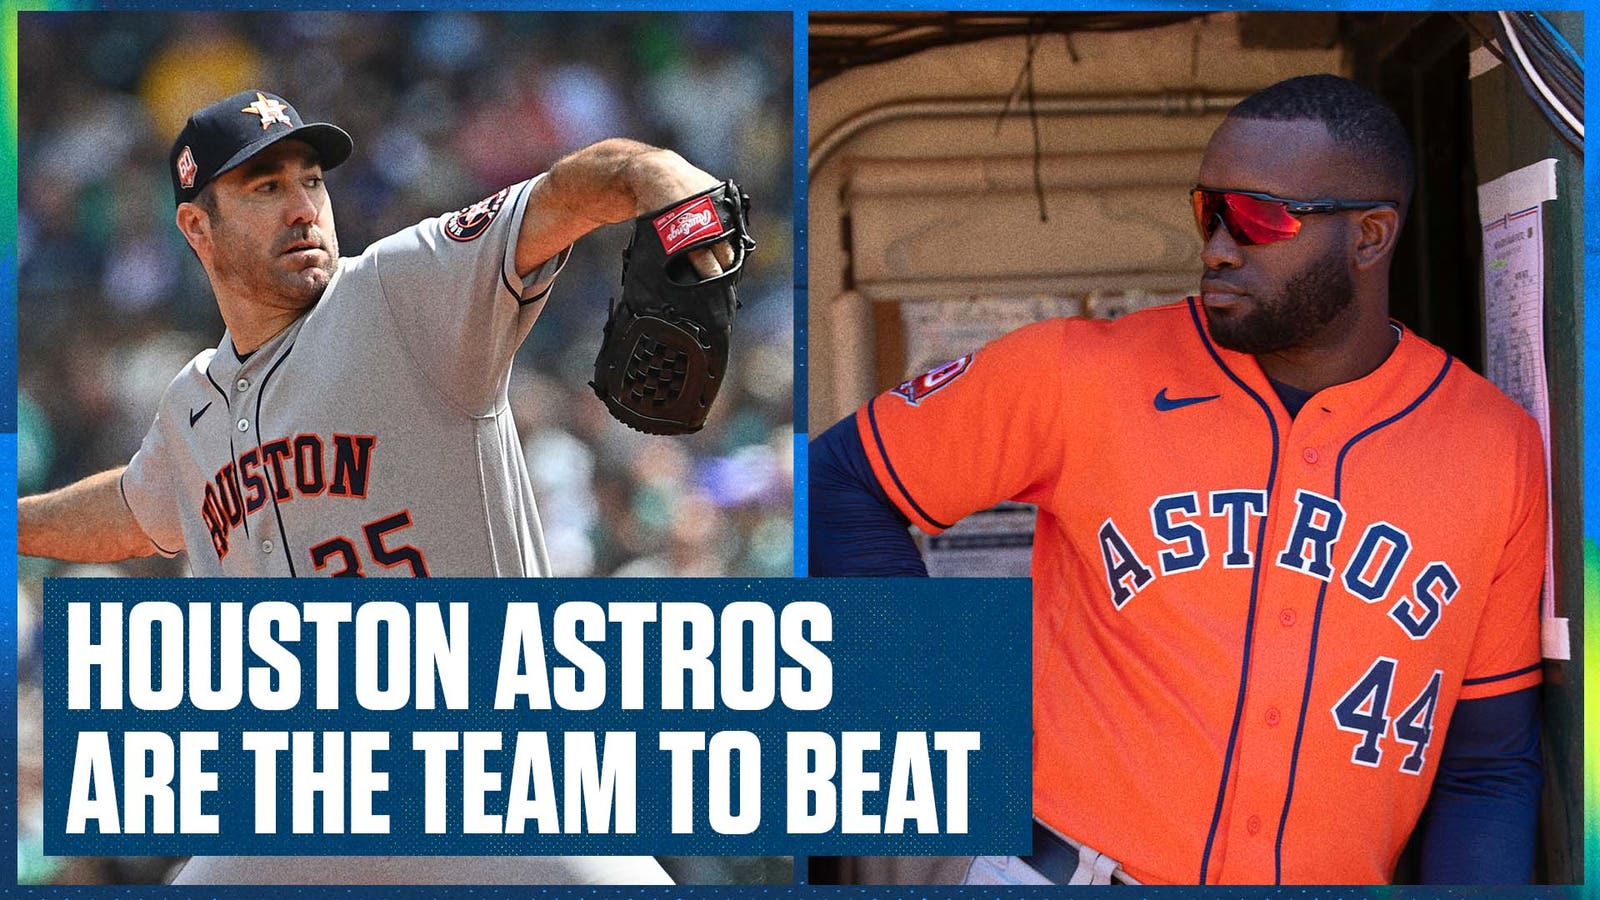 Houston Astros are still the team to beat in the American League